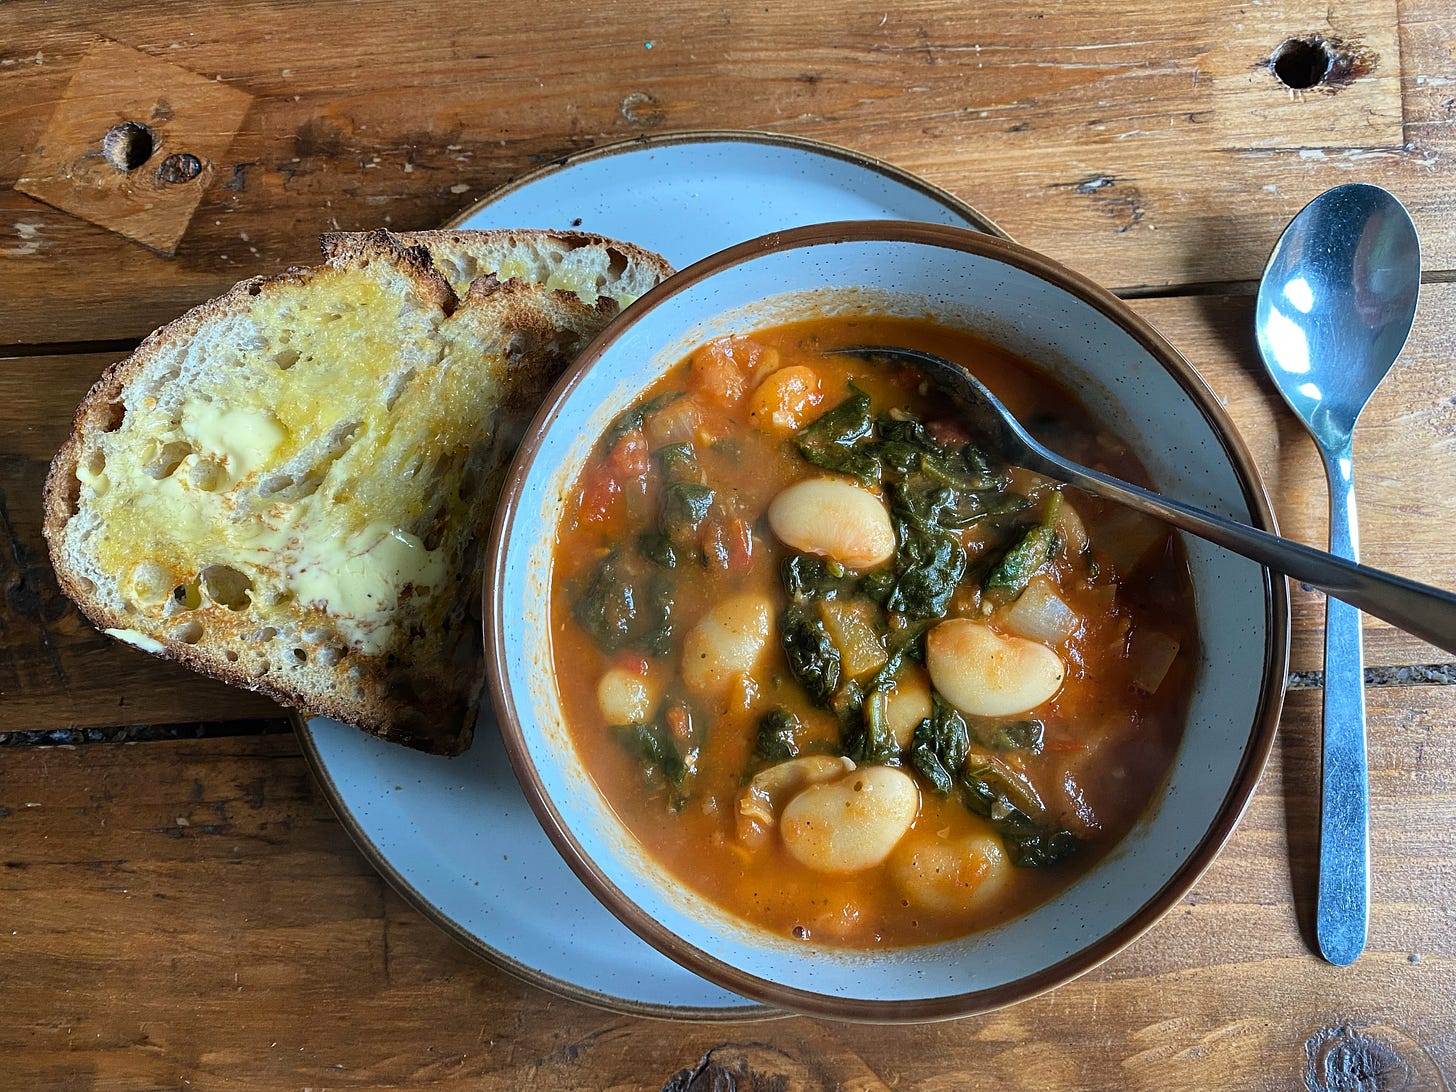 Bowl of soup with beans, green vegetables and a tomato broth in a bowl, a piece of bread and butter to the side